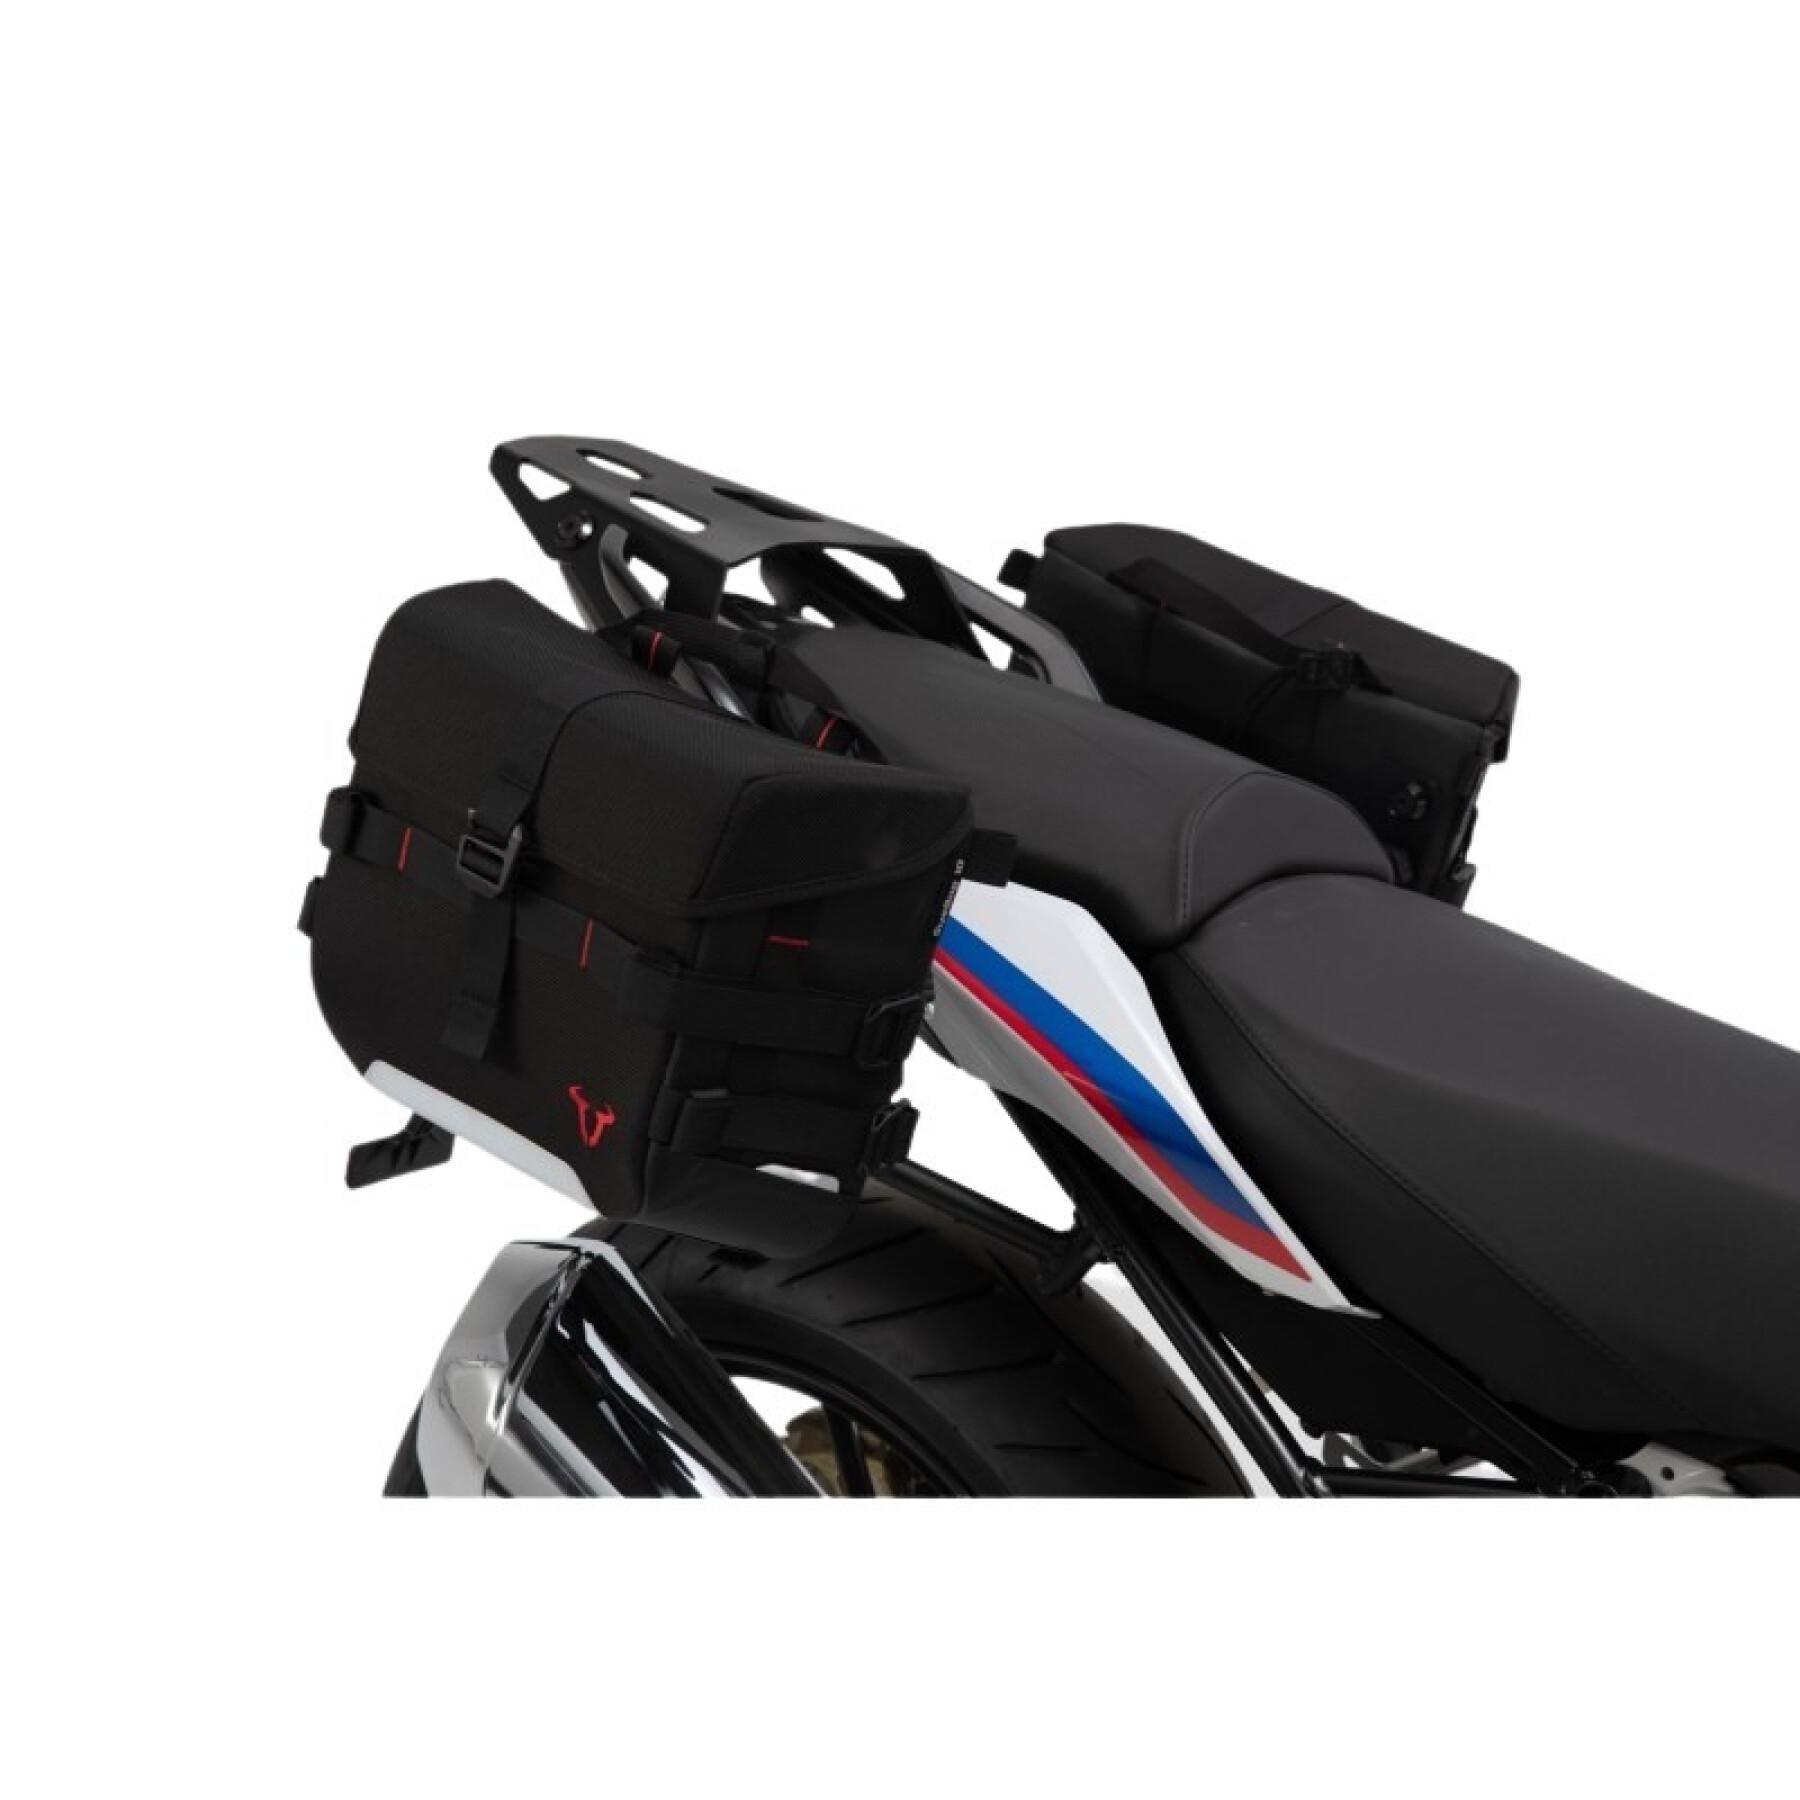 Paar zijkoffers SW-Motech Sysbag 15/10 BMW R1200R (15-18) / R1250R (18-) / R1250RS (18-)